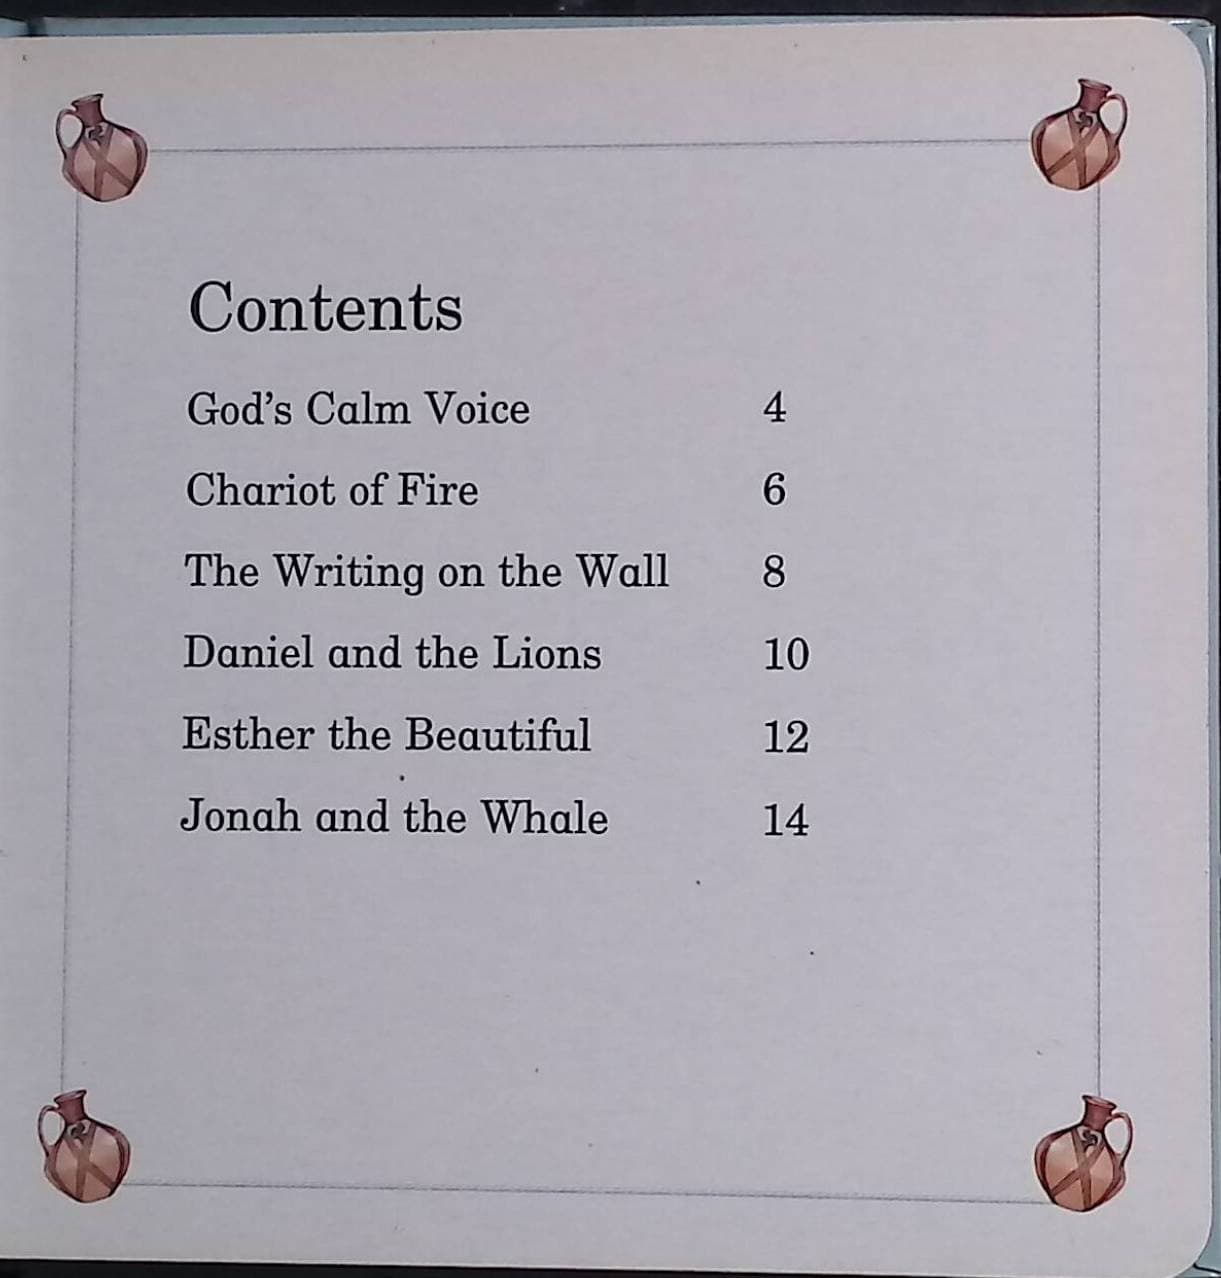 Jonah and the Whale & Other Stories (First Bible Story Bb) board book